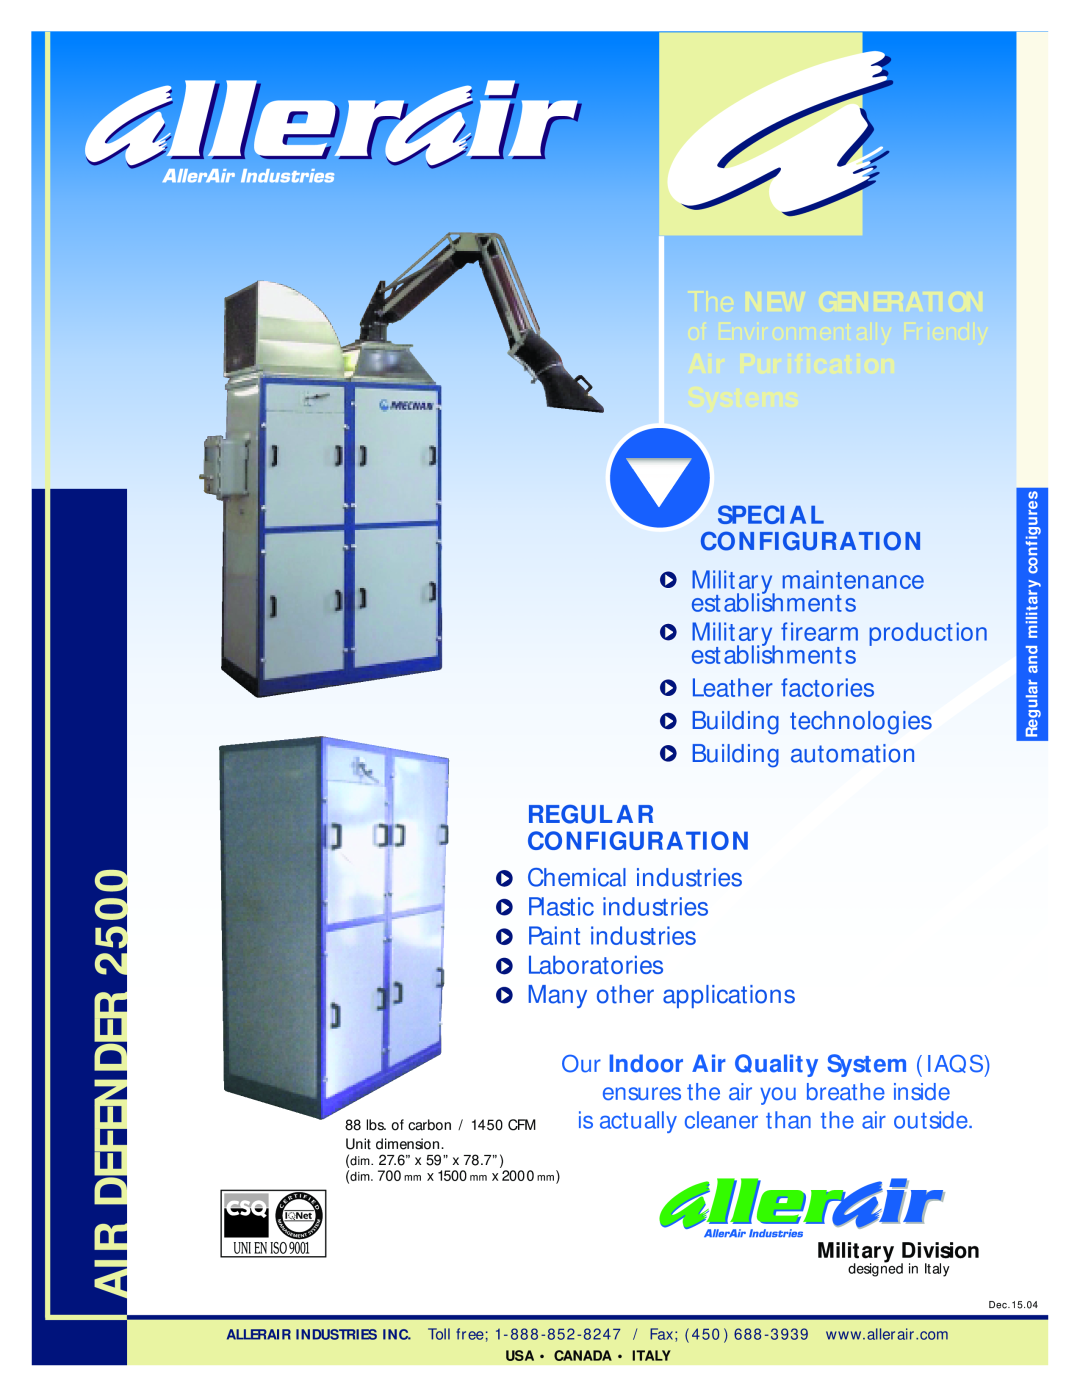 AllerAir 2500 manual Air Defender, The NEW GENERATION, Air Purification Systems, of Environmentally Friendly, Special 